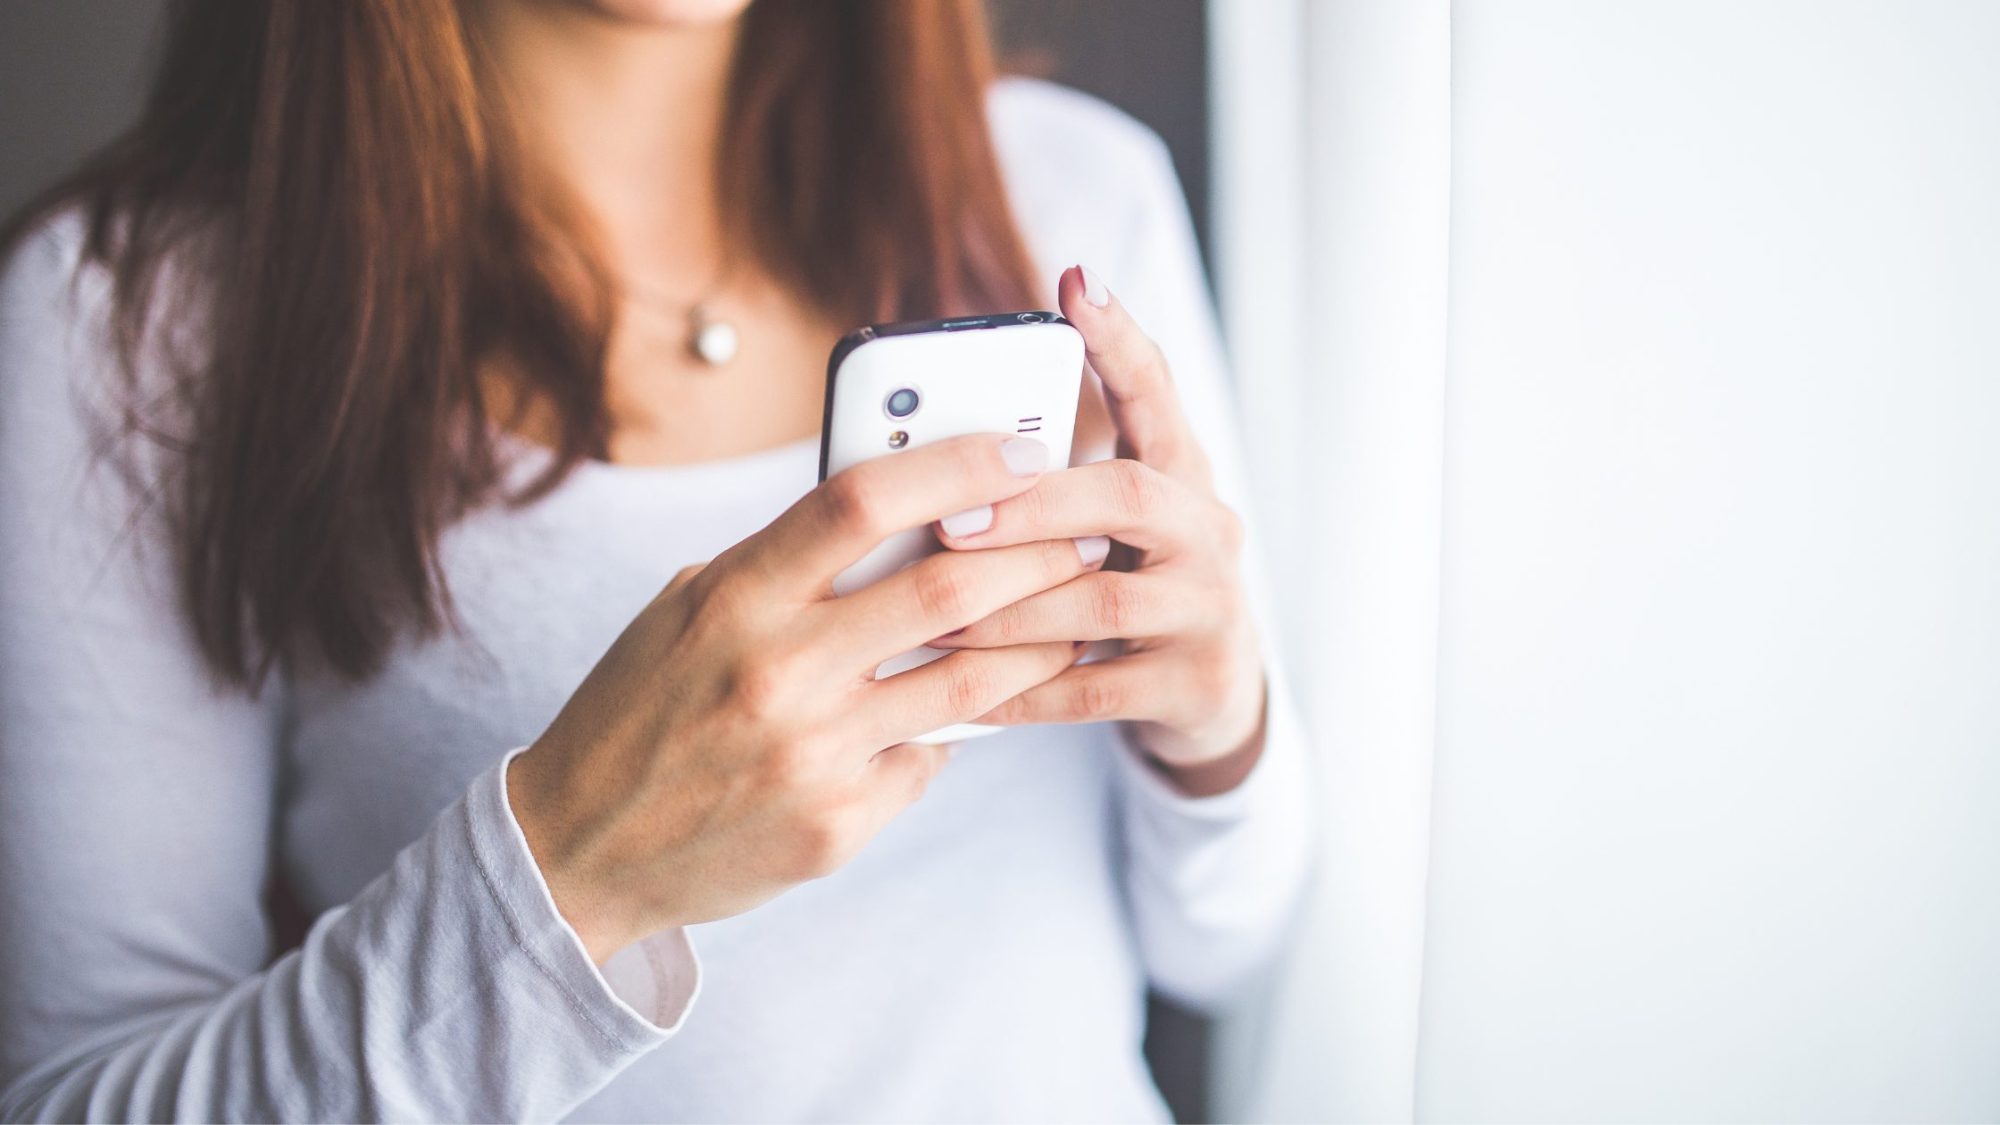 A woman with long brown hair, wearing a white long-sleeve top, holds and looks at a smartphone.